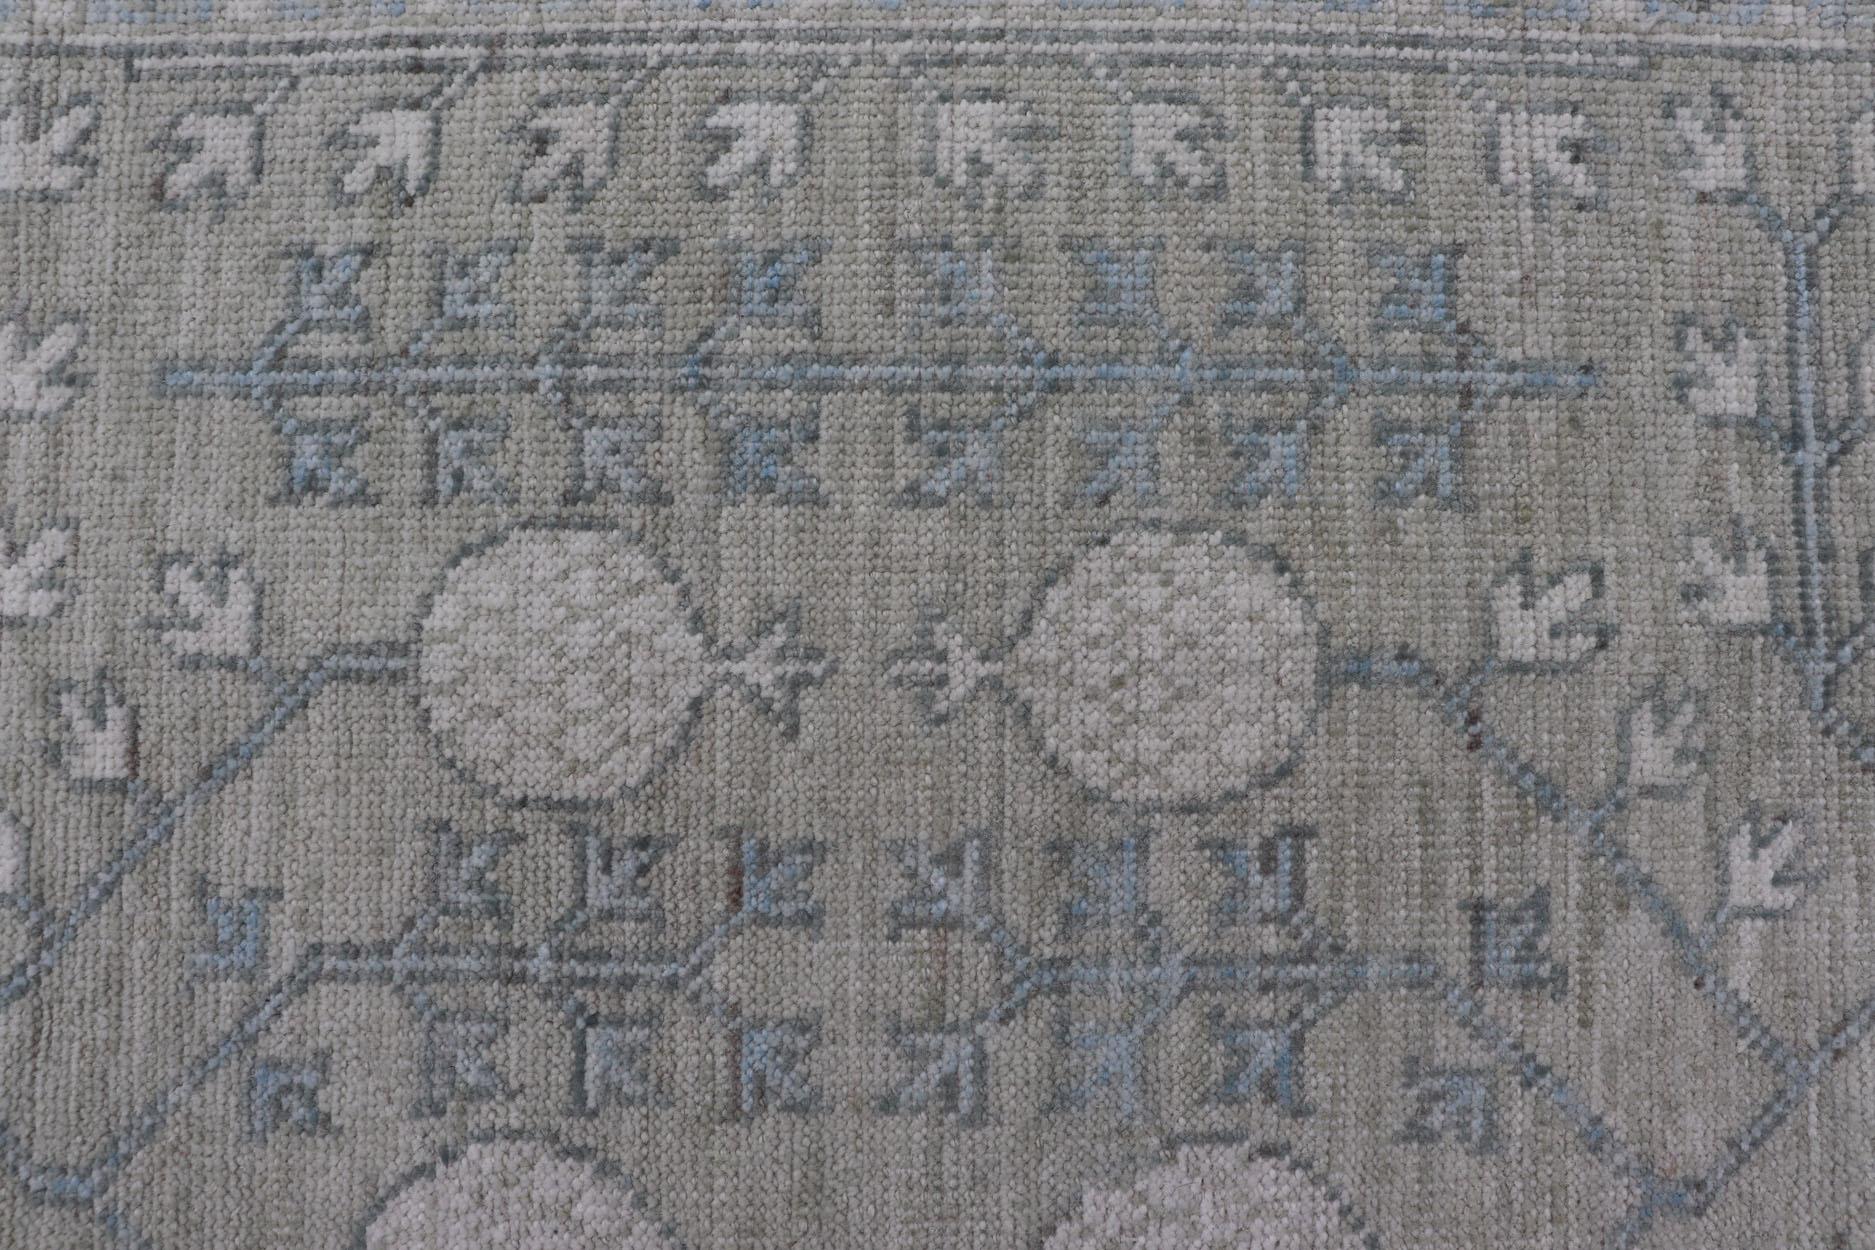 Afghan Modern Tribal Khotan Rug in Shades of Cream, Green, Blue, and Gray For Sale